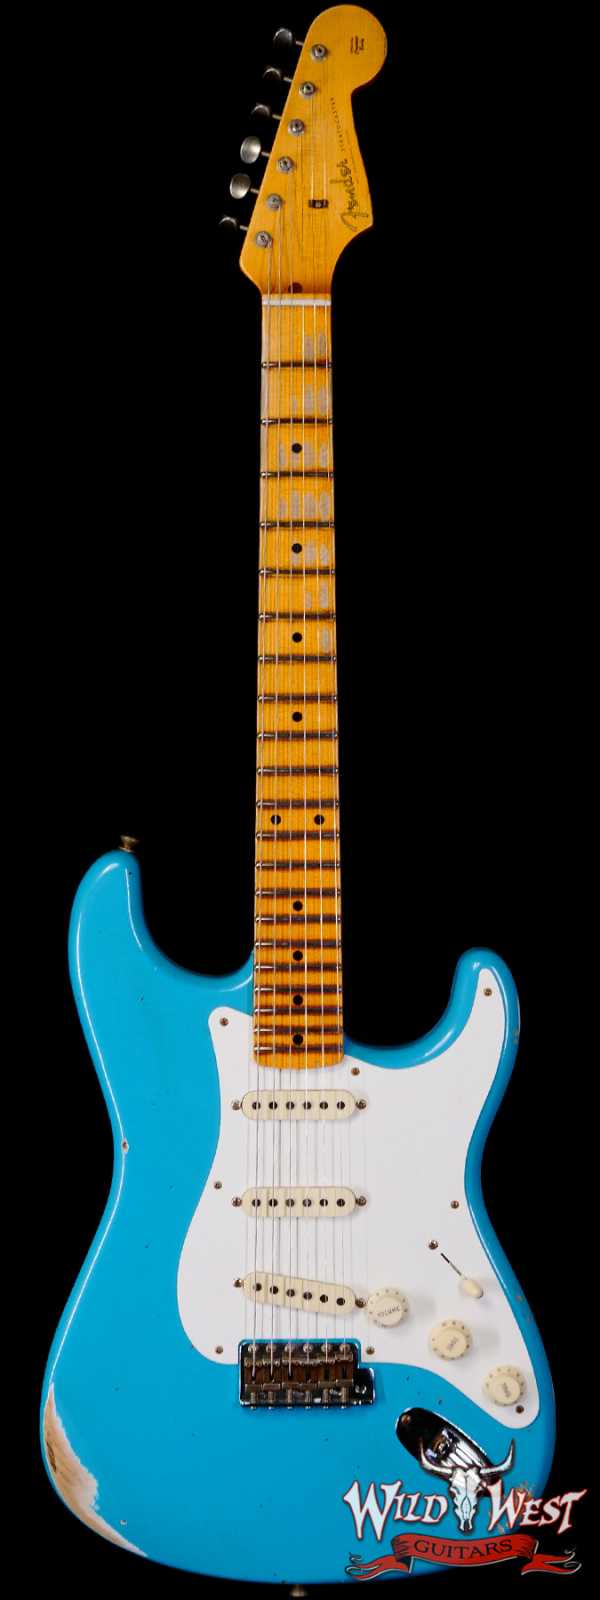 Fender Custom Shop 1957 Ash Stratocaster Hand-Wound Pickups Quatersawn Maple Neck Relic Taos Turquoise